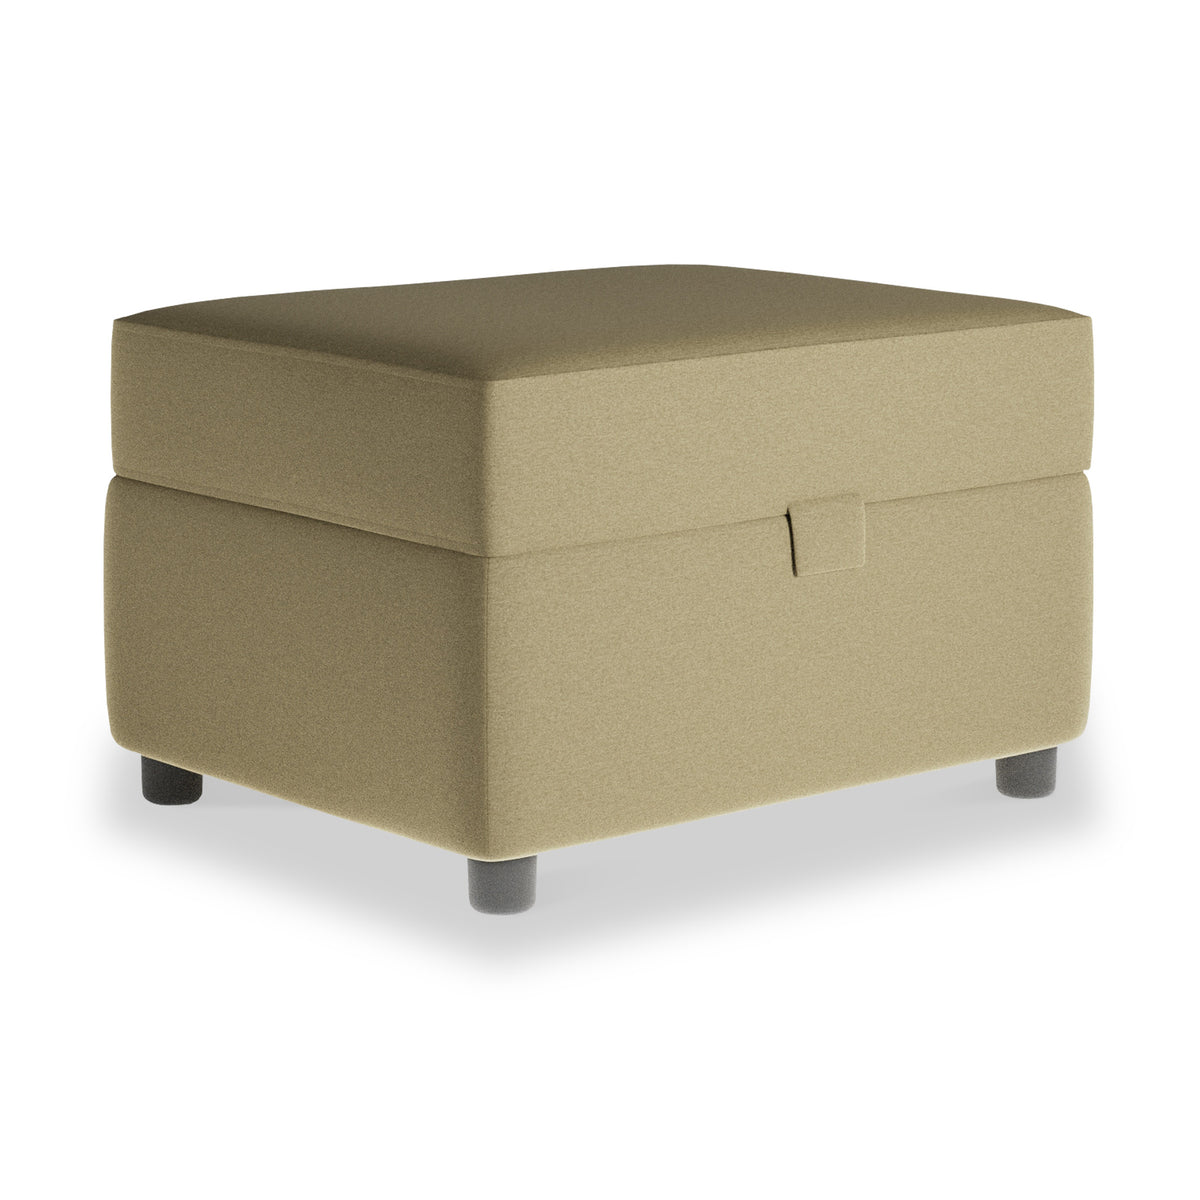 Thomas Olive Small Storage Footstool from Roseland Furniture